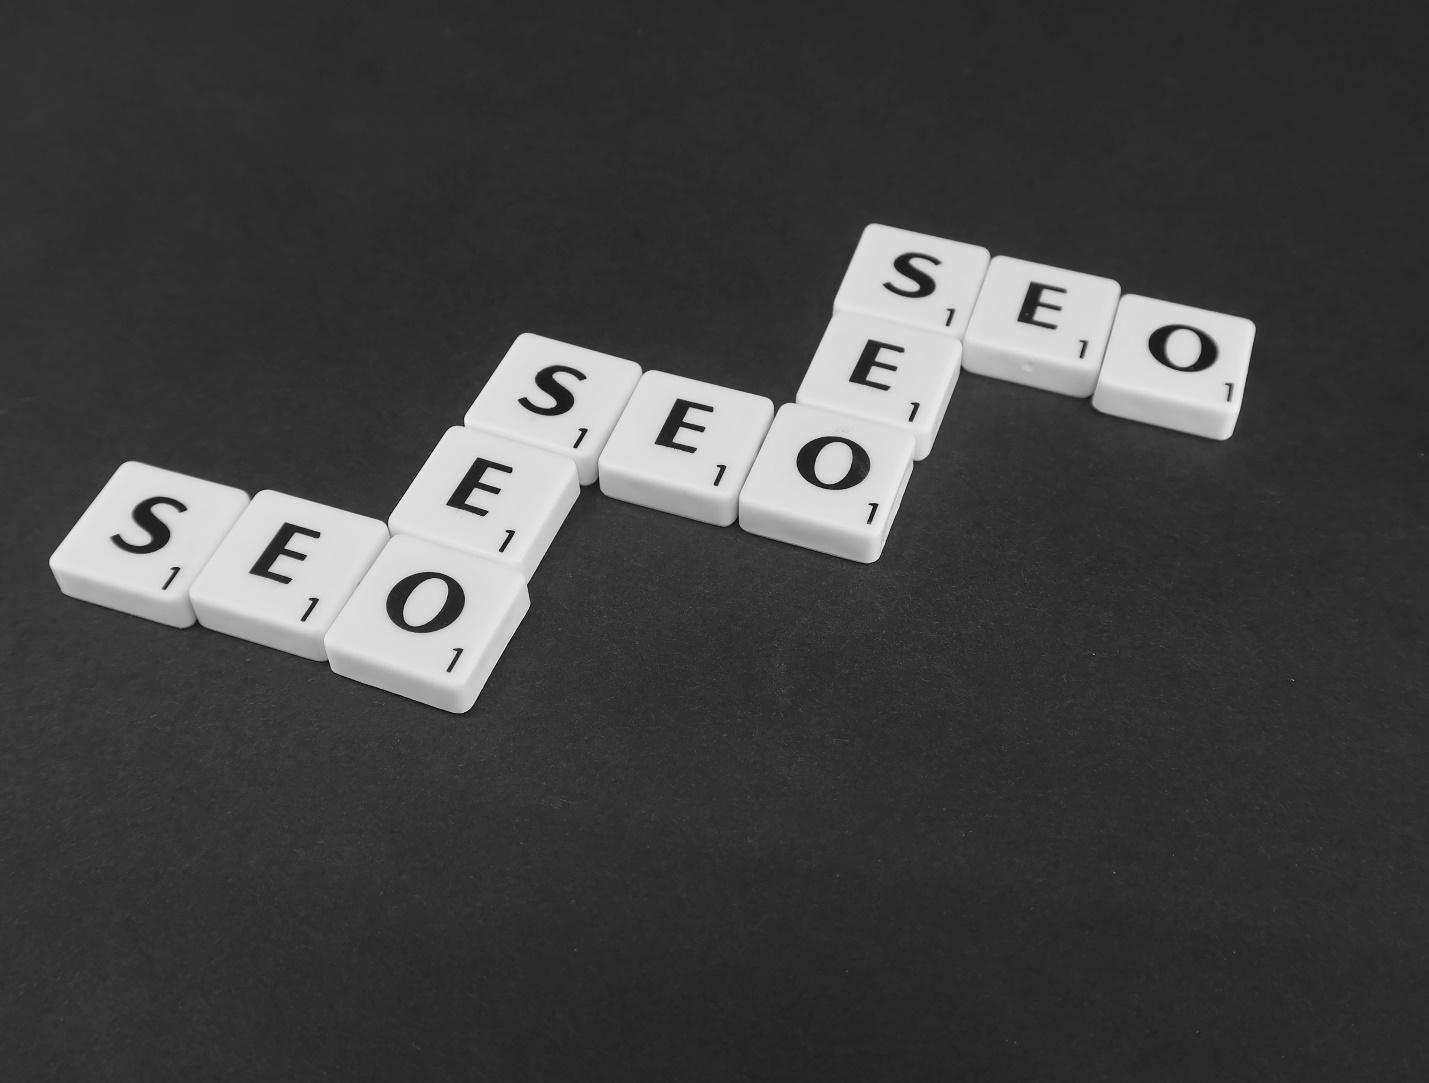 white label SEO provider for a business